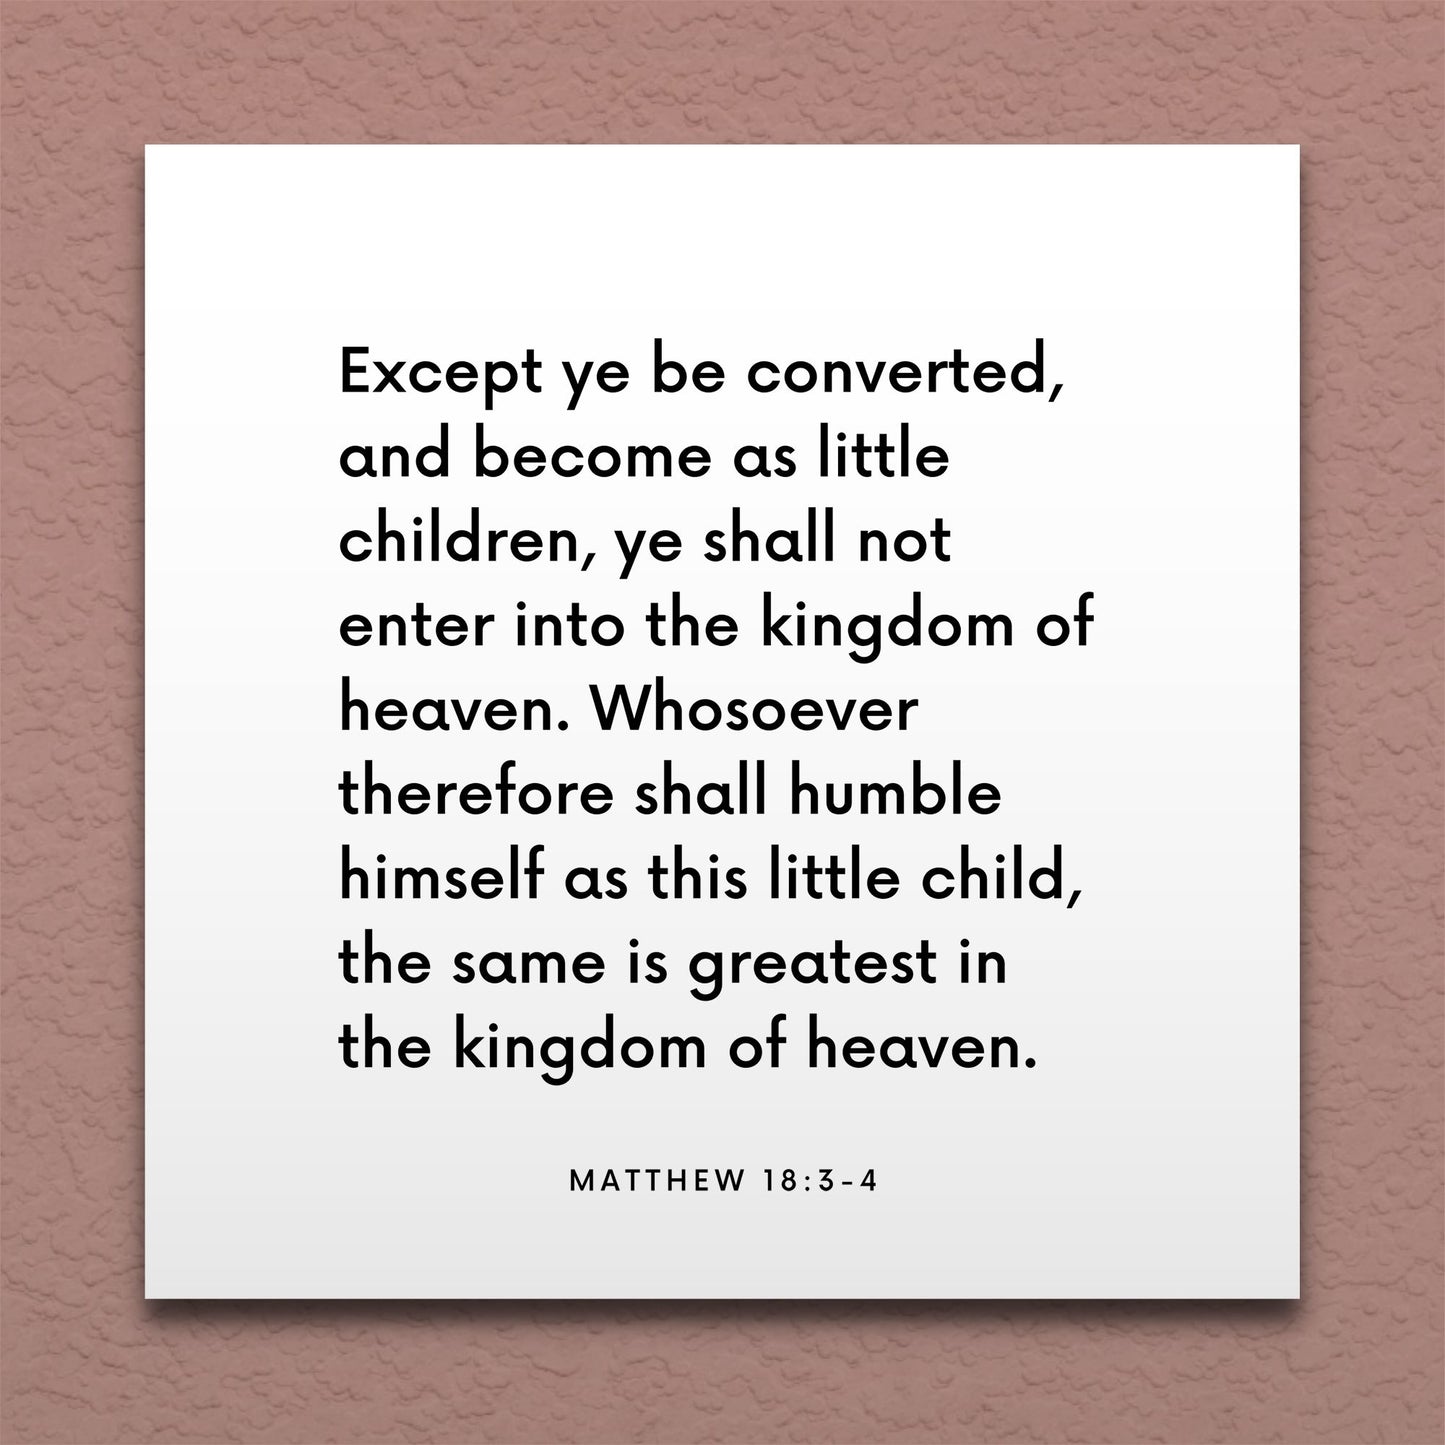 Wall-mounted scripture tile for Matthew 18:3-4 - "Except ye be converted, and become as little children"